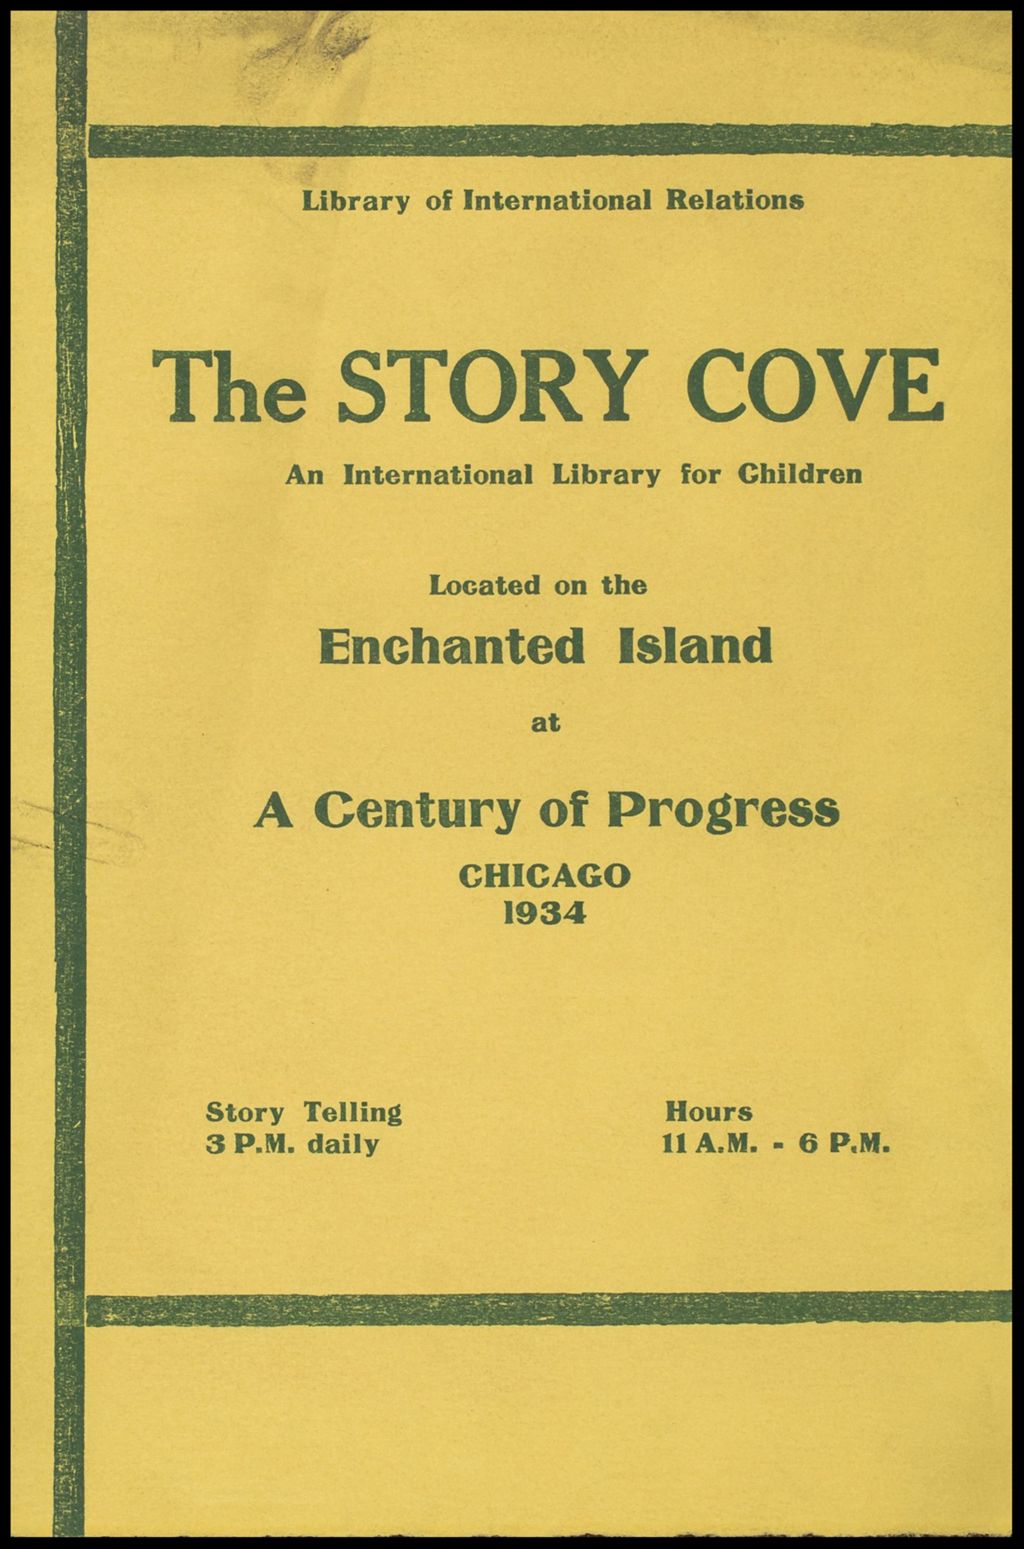 Miniature of The Story Cove: an international library for children (Folder 16-249)